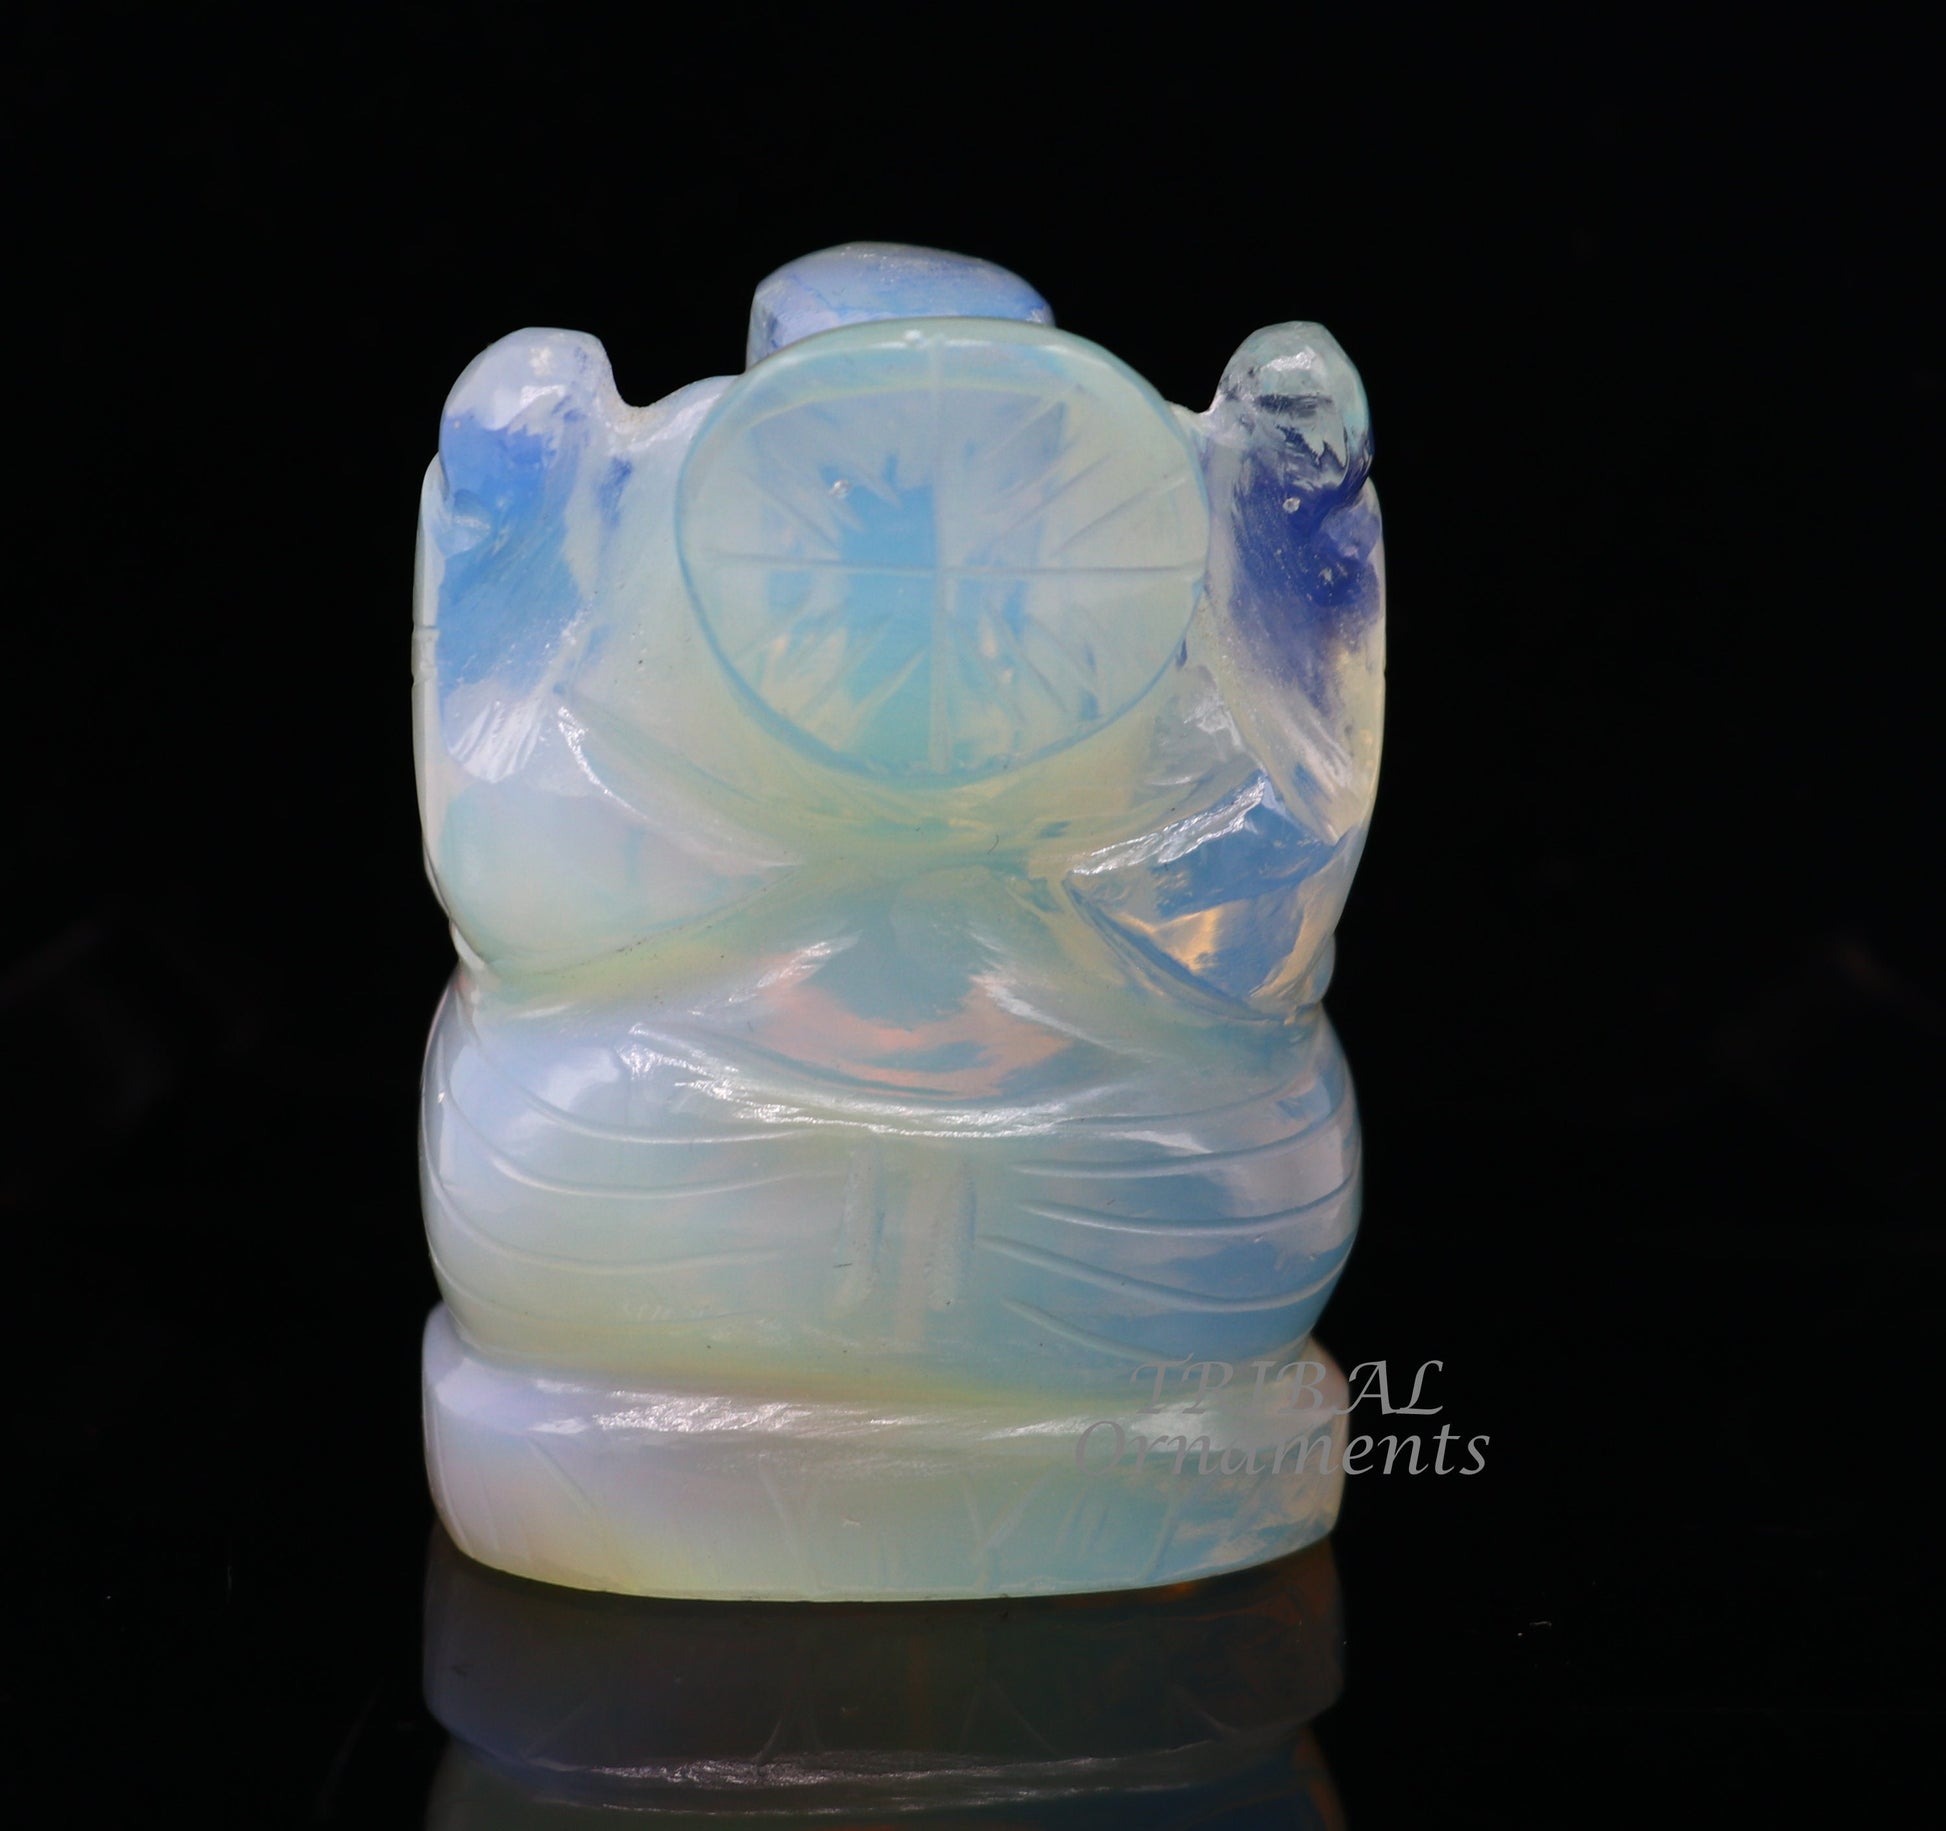 Divine lord Ganesha statue figurine, amazing moon stone style resin statue sculpture, best puja temple art for wealth prosperity stna06 - TRIBAL ORNAMENTS